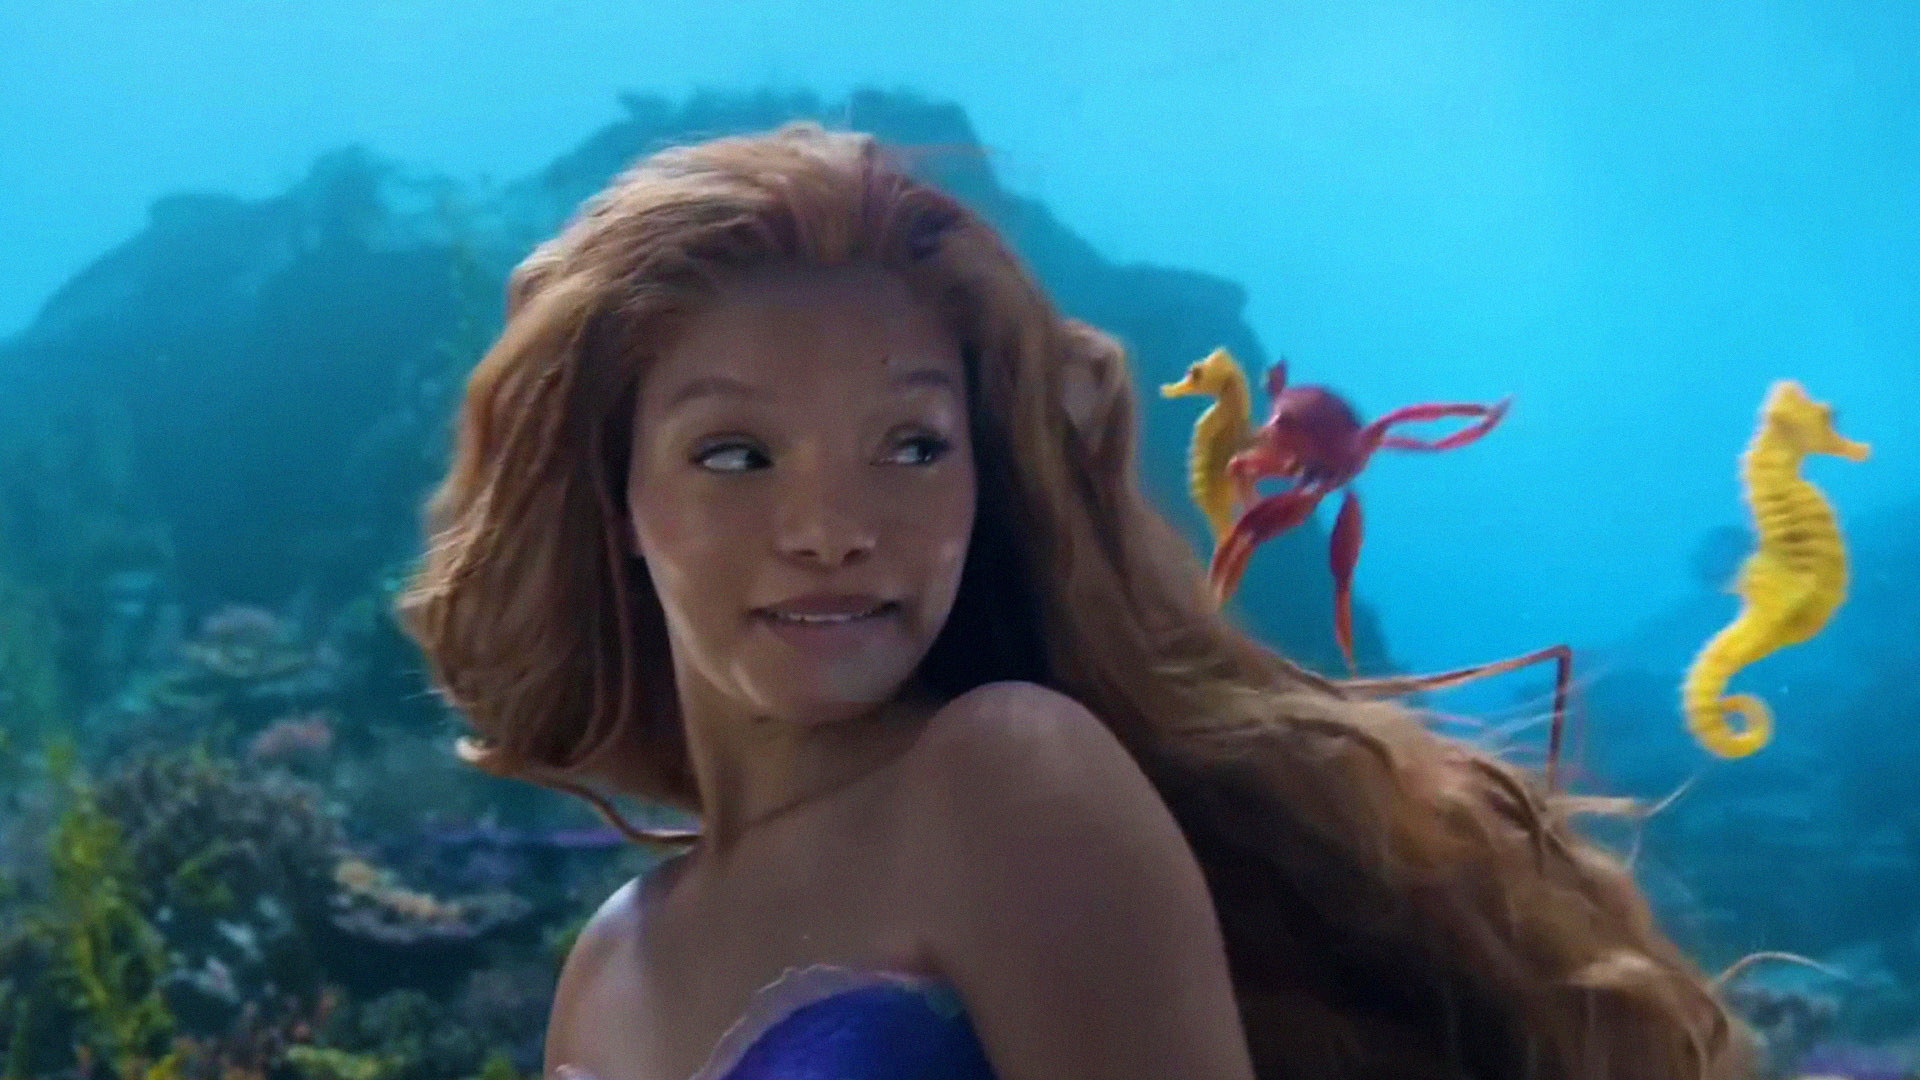 First Reactions to The Little Mermaid Are In, Here's What People Are Saying